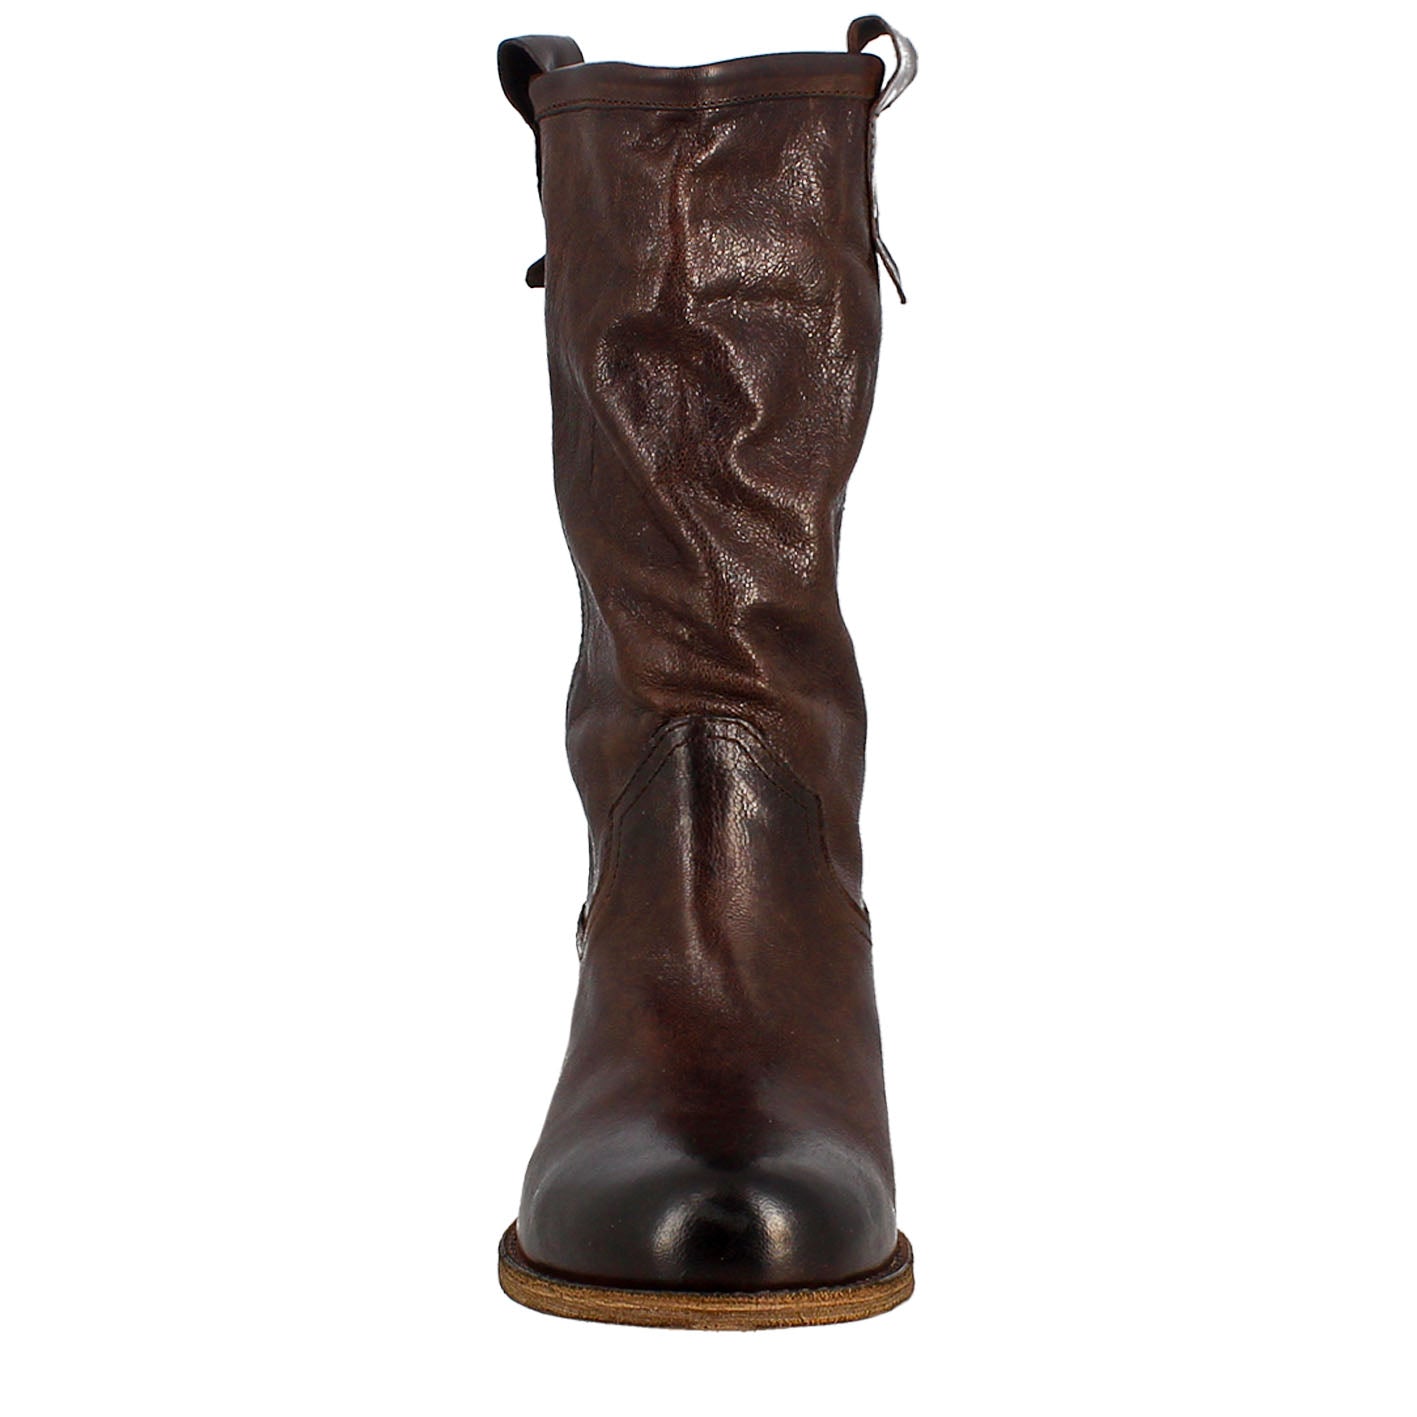 Women's calf-high boot in dark brown vintage leather, unlined